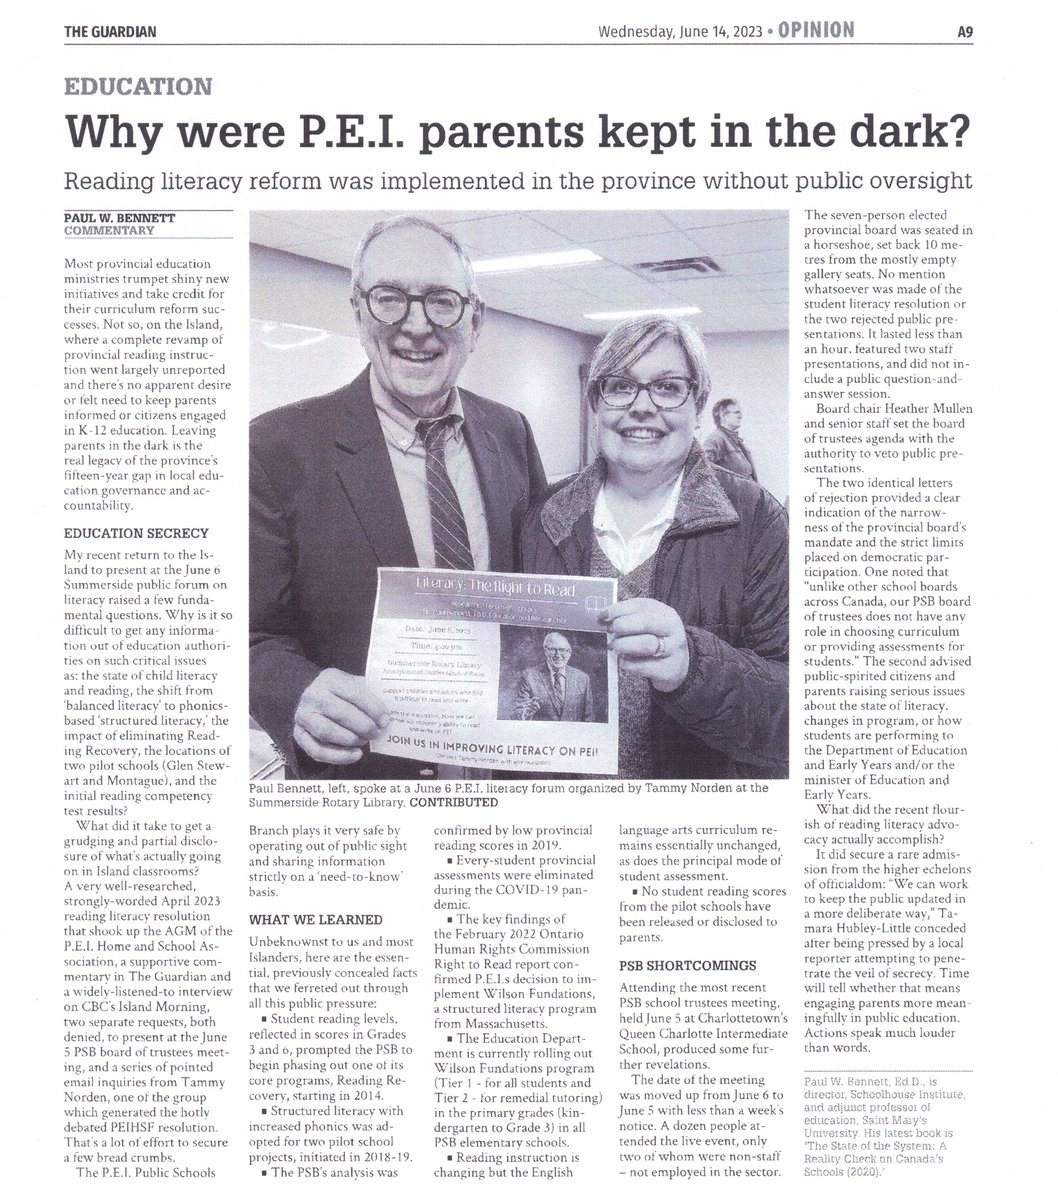 Reading Literacy Reform: Why were P.E.I. Parents Kept in the Dark?  What we Learned in today's Charlottetown Guardian @SaltWireNews Ty @TammyNorden for your advocacy.  Over to @dennyking @NatalieJ_PEI @SarahA  @HalifaxLearning #PEIed #PEIpoli #cdned